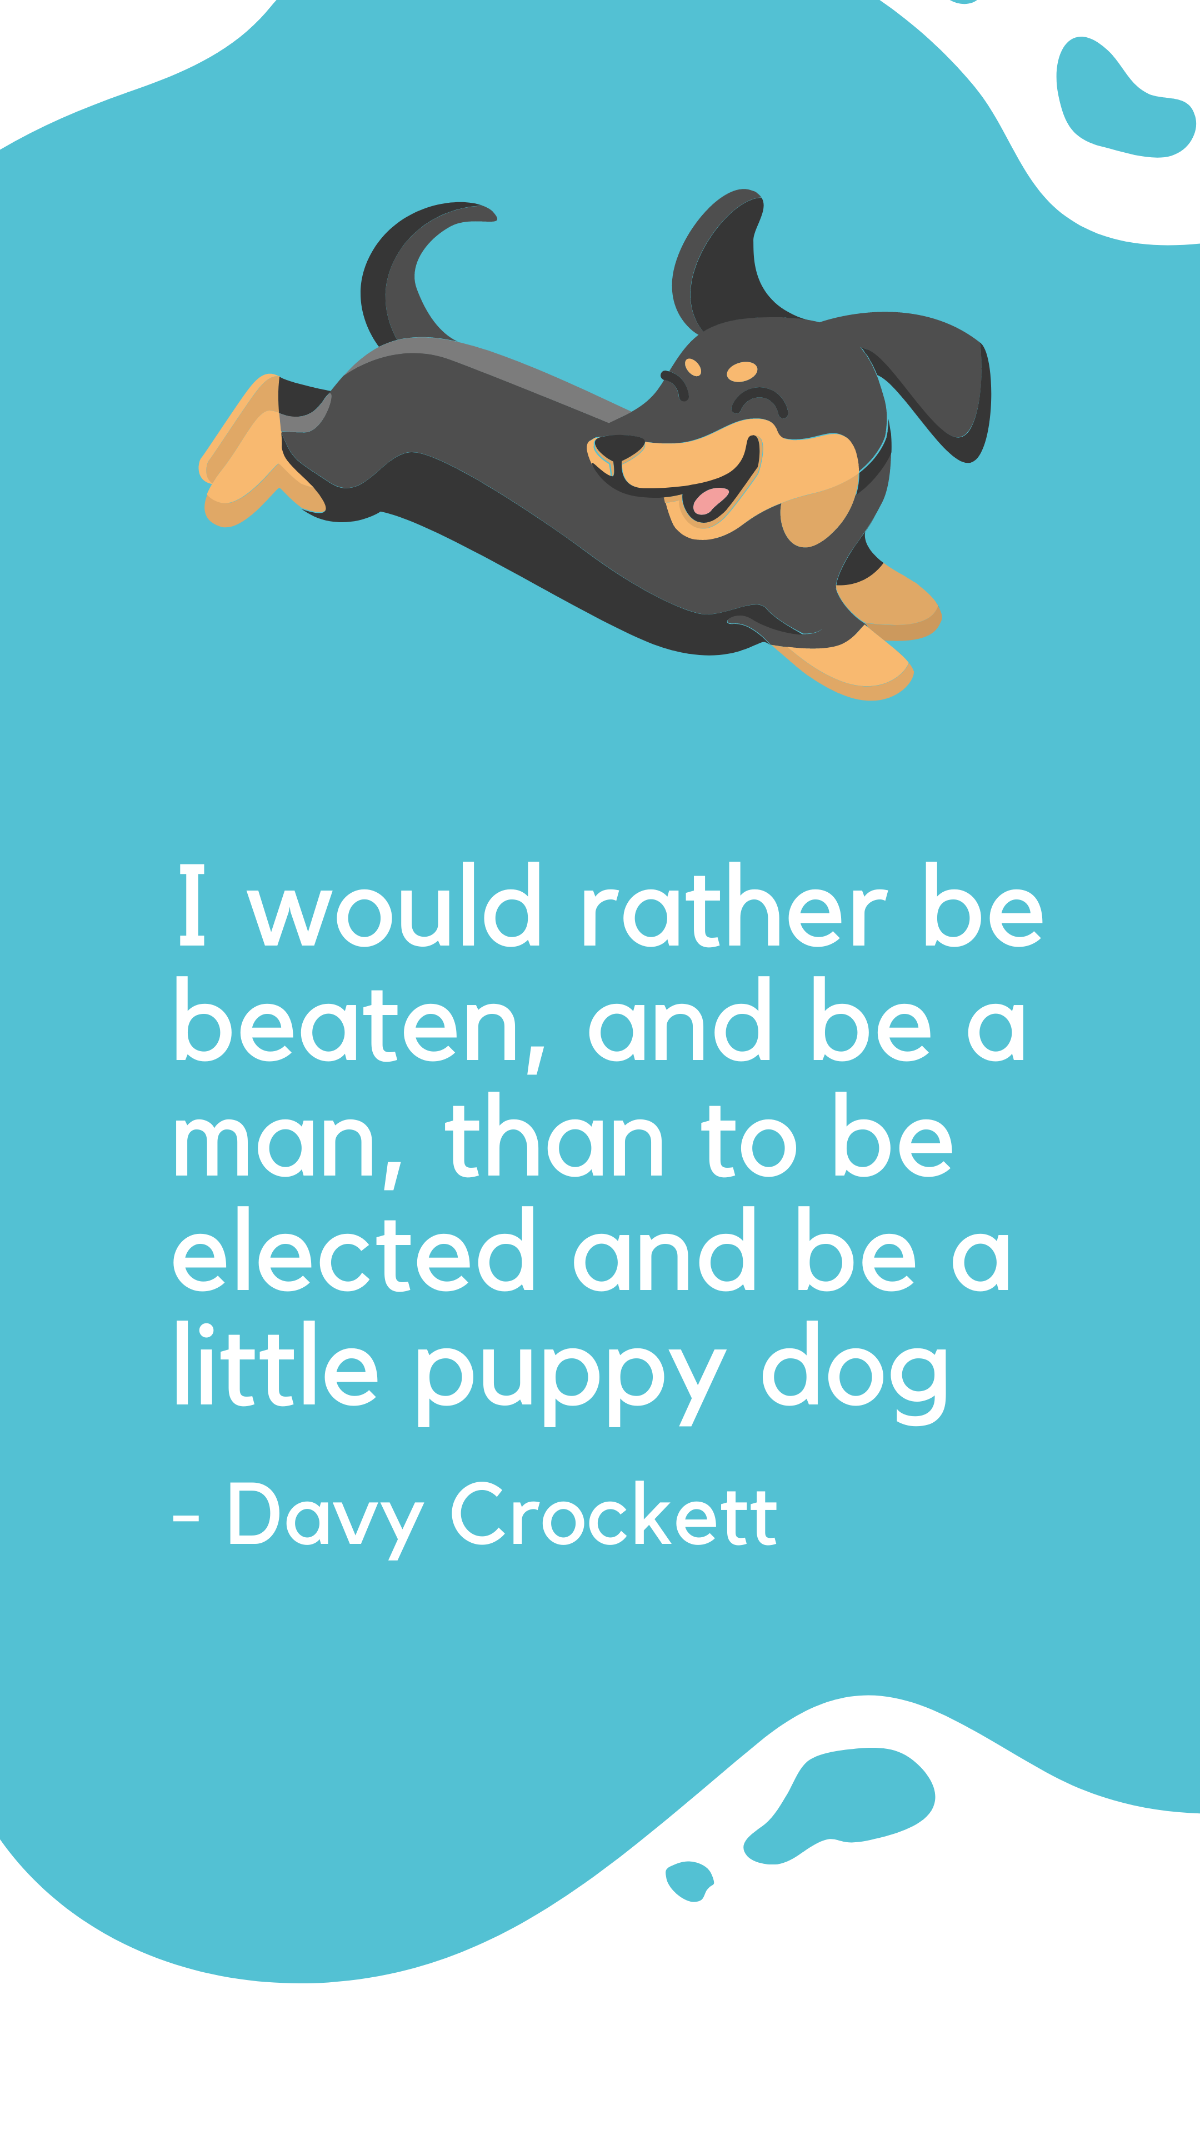 Davy Crockett - I would rather be beaten, and be a man, than to be elected and be a little puppy dog Template